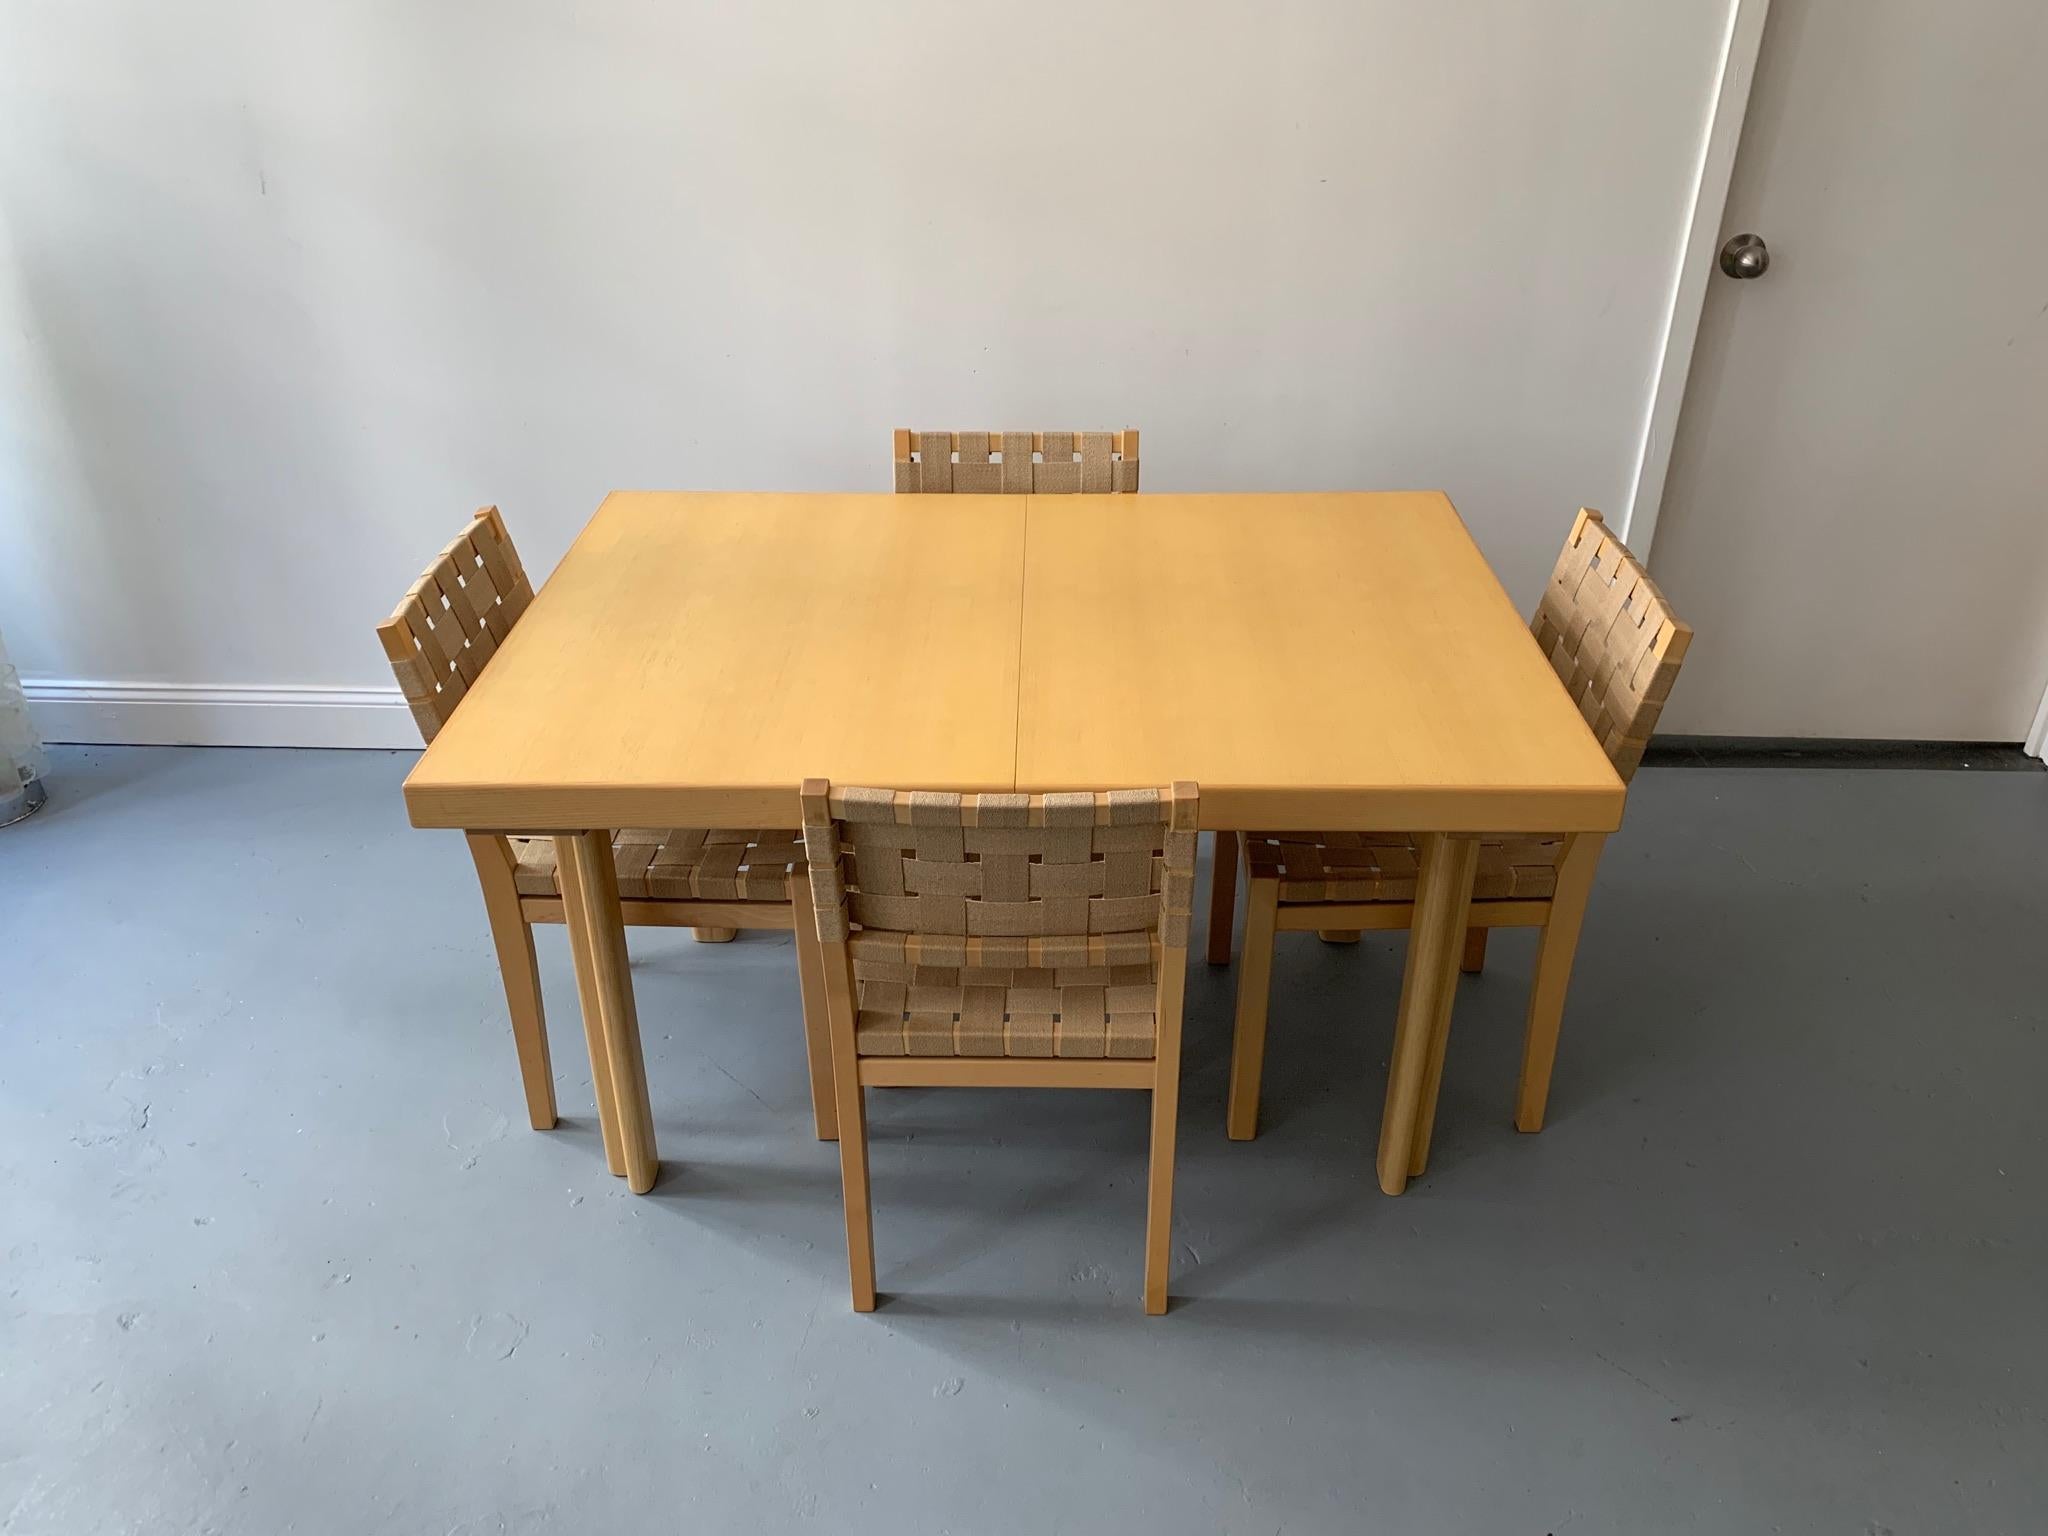 Alvar Aalto originally designed this table in 1954. The table is made of ash and Nordic birch. The table has two leaves that are stored inside the table and allow the table to expand from 51.25” to 91.5”. The table has it’s original finish and is in